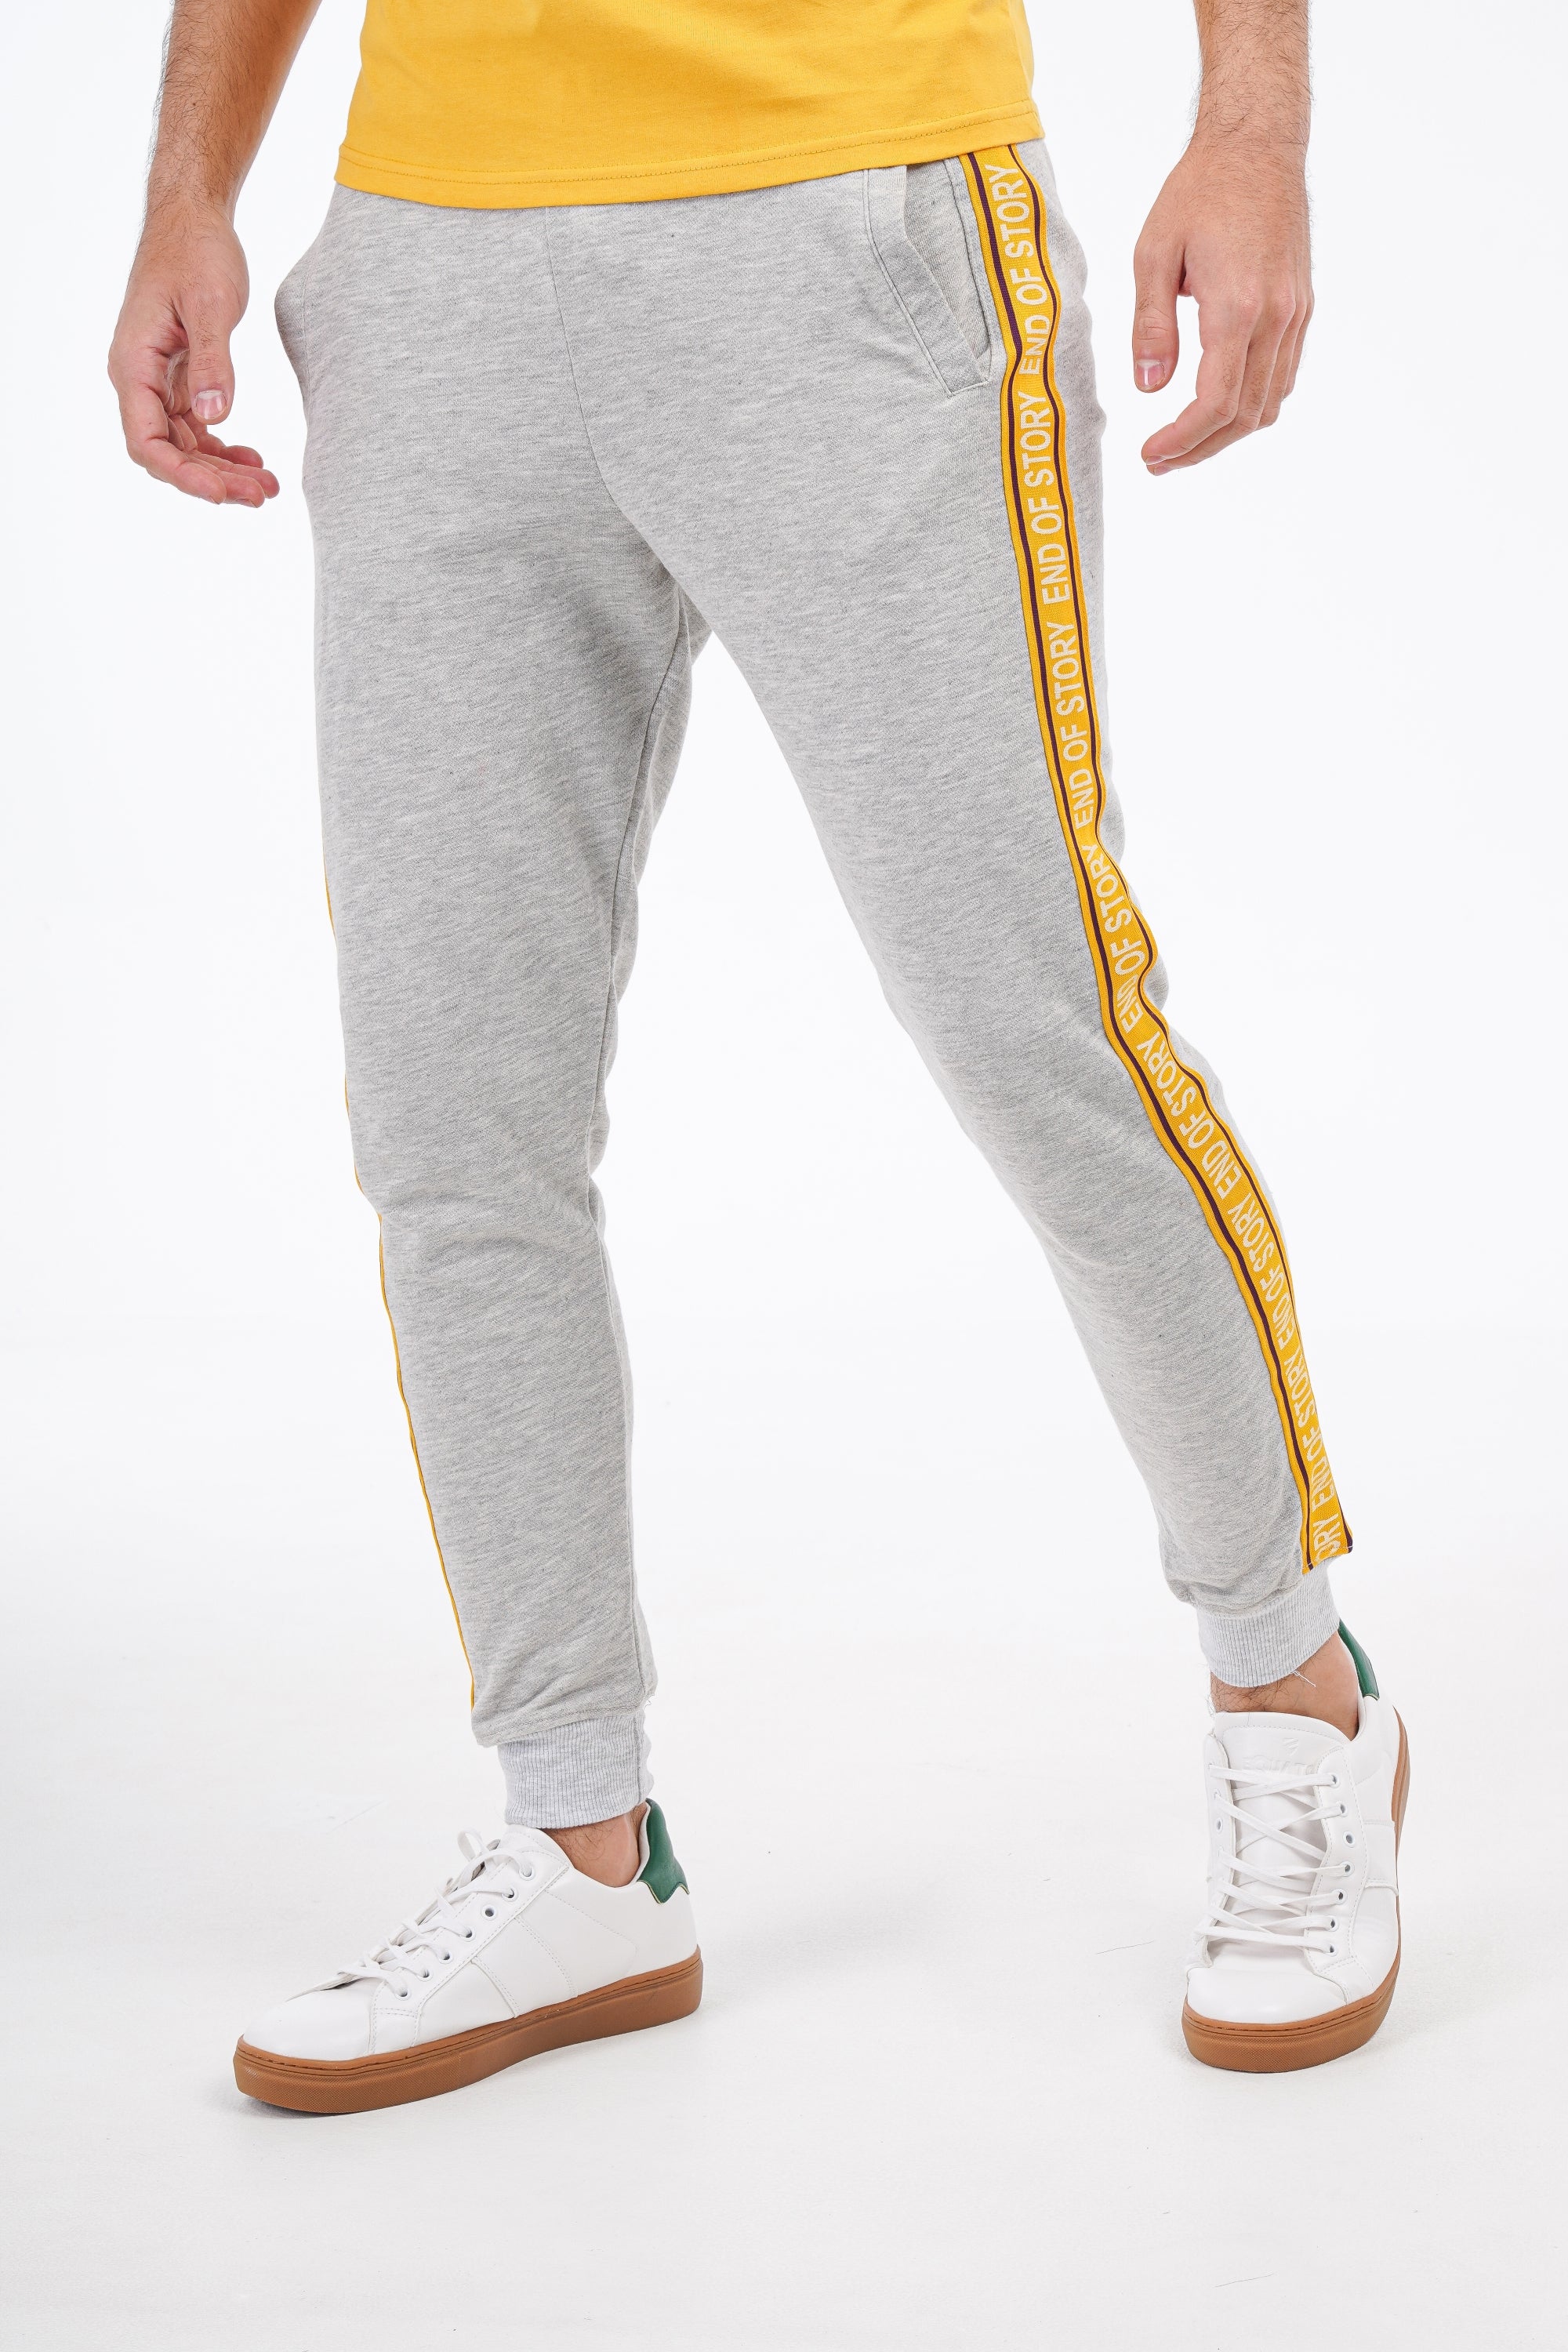 Yellow Tape Joggers